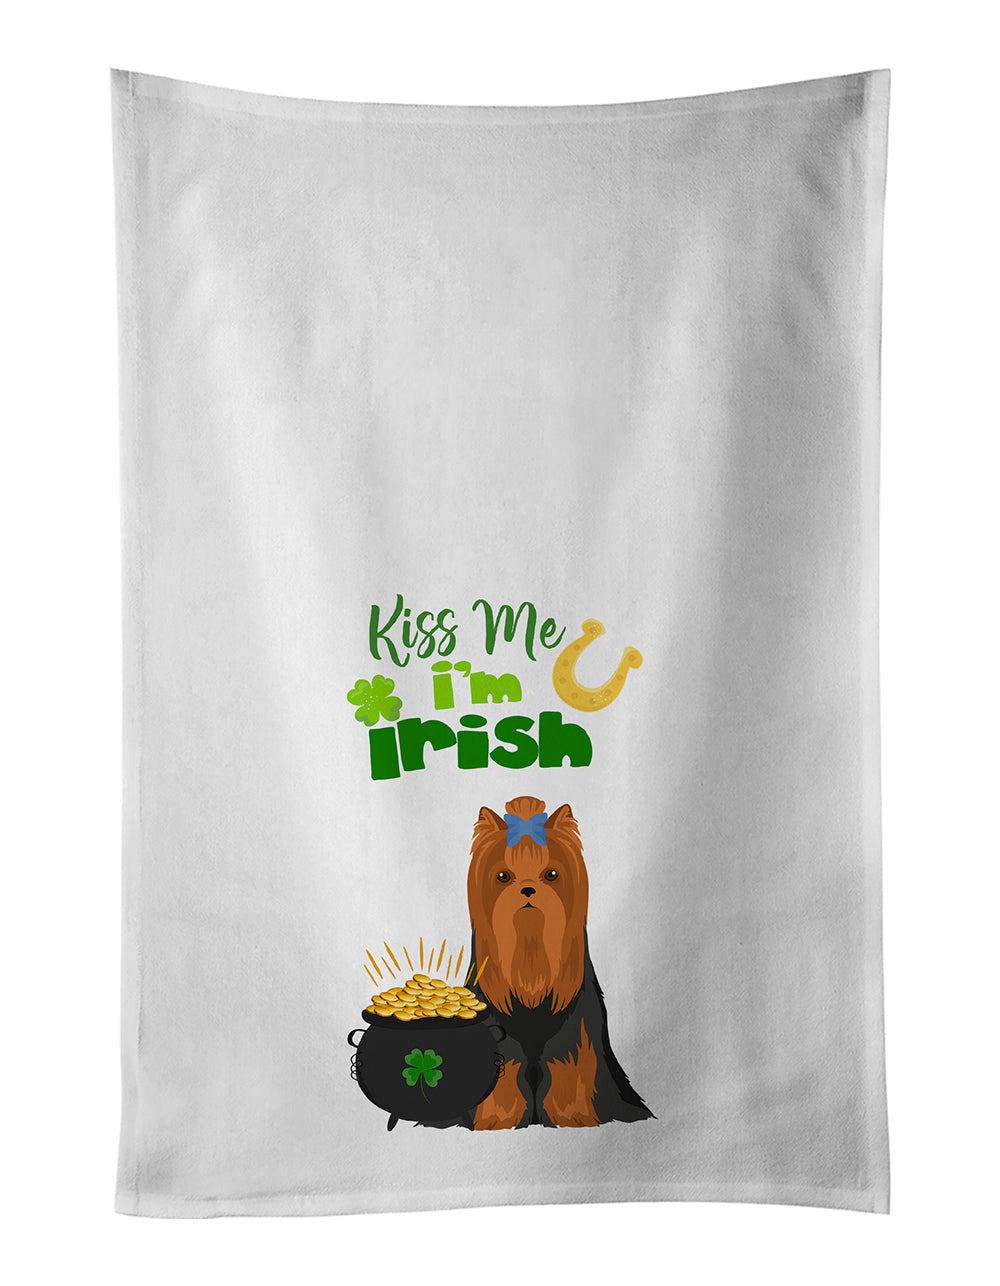 Buy this Black and Tan Full Coat Yorkshire Terrier St. Patrick's Day White Kitchen Towel Set of 2 Dish Towels